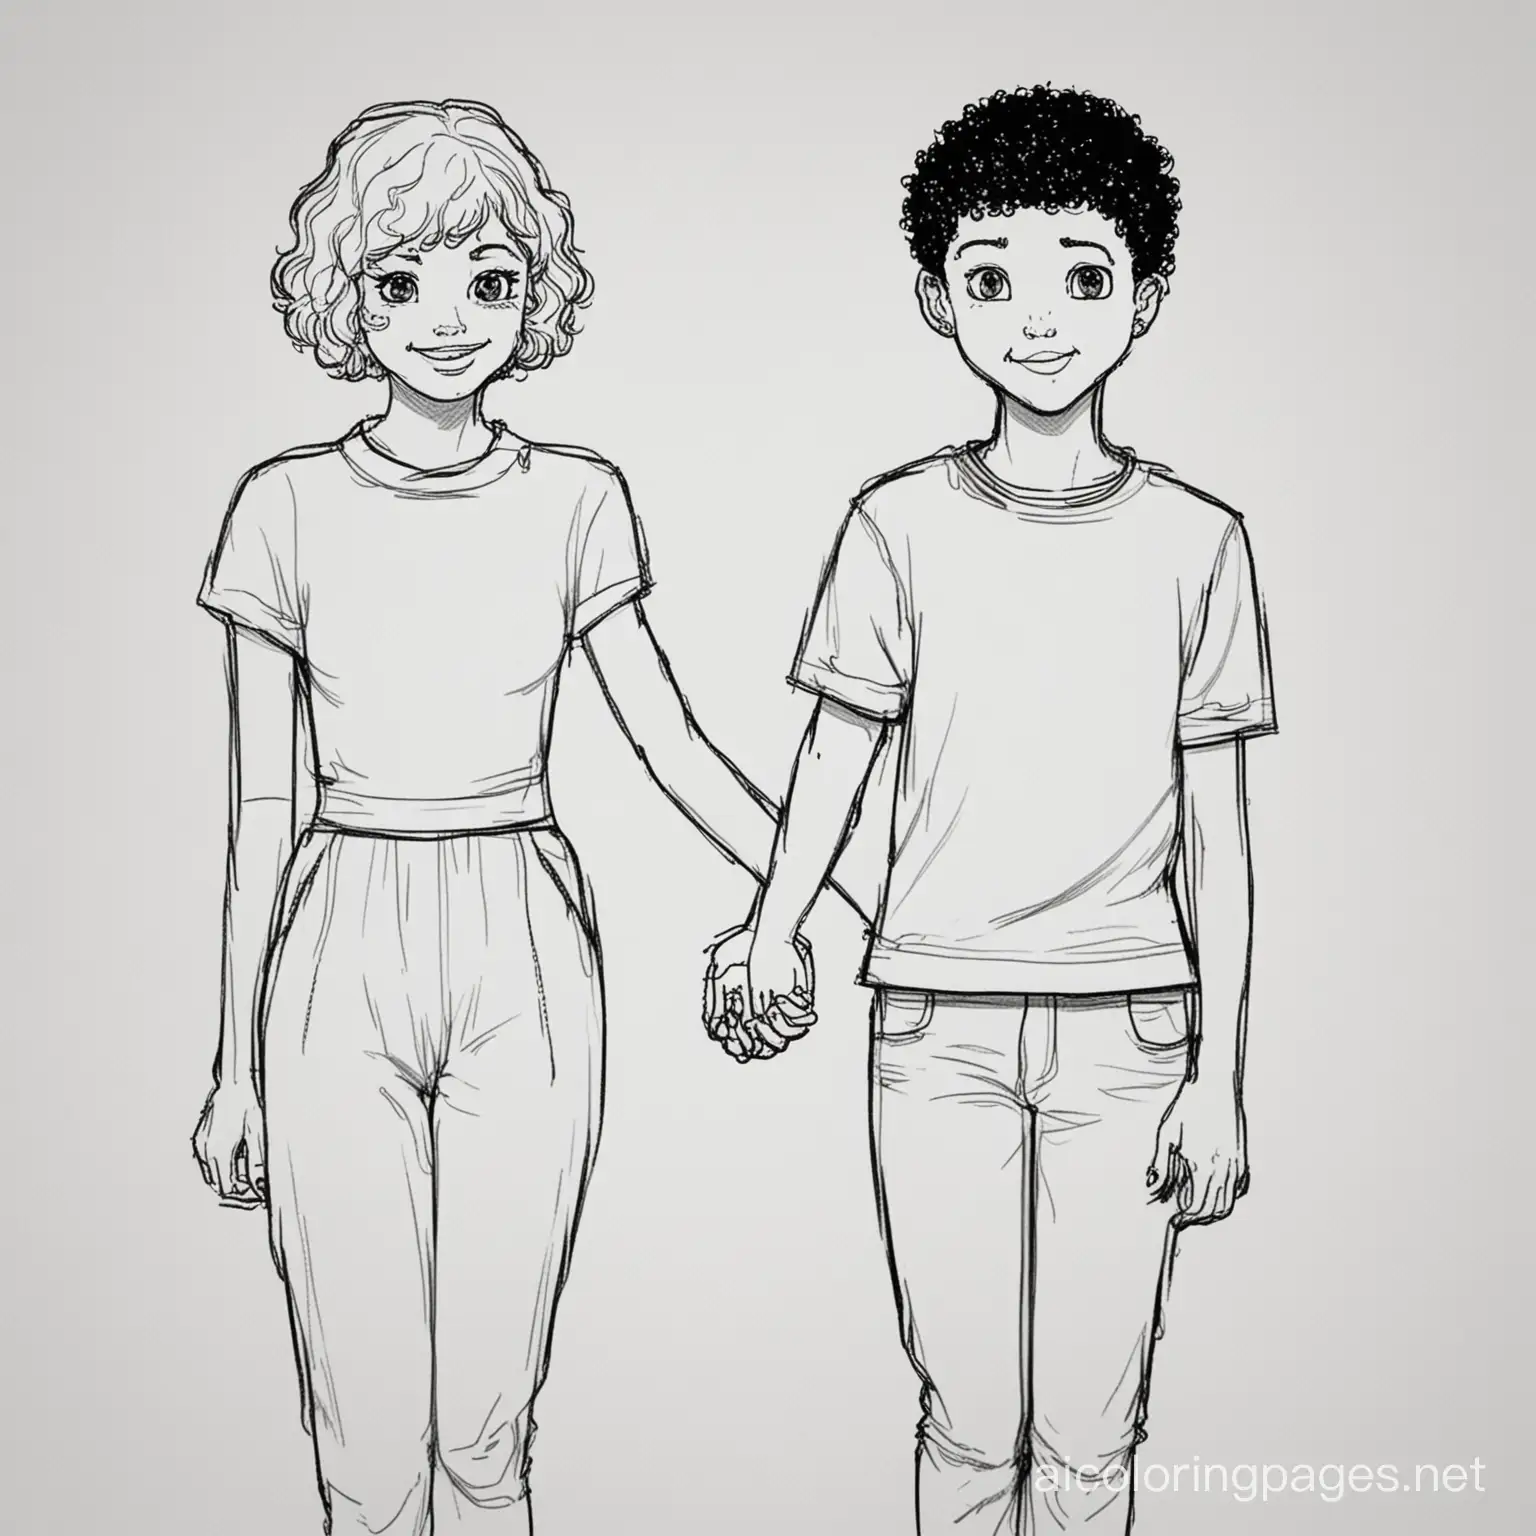 teenage Girl with curly bob cut hair holding hands with teenage  boy with buzz cut dating, Coloring Page, black and white, line art, white background, Simplicity, Ample White Space. The background of the coloring page is plain white to make it easy for young children to color within the lines. The outlines of all the subjects are easy to distinguish, making it simple for kids to color without too much difficulty